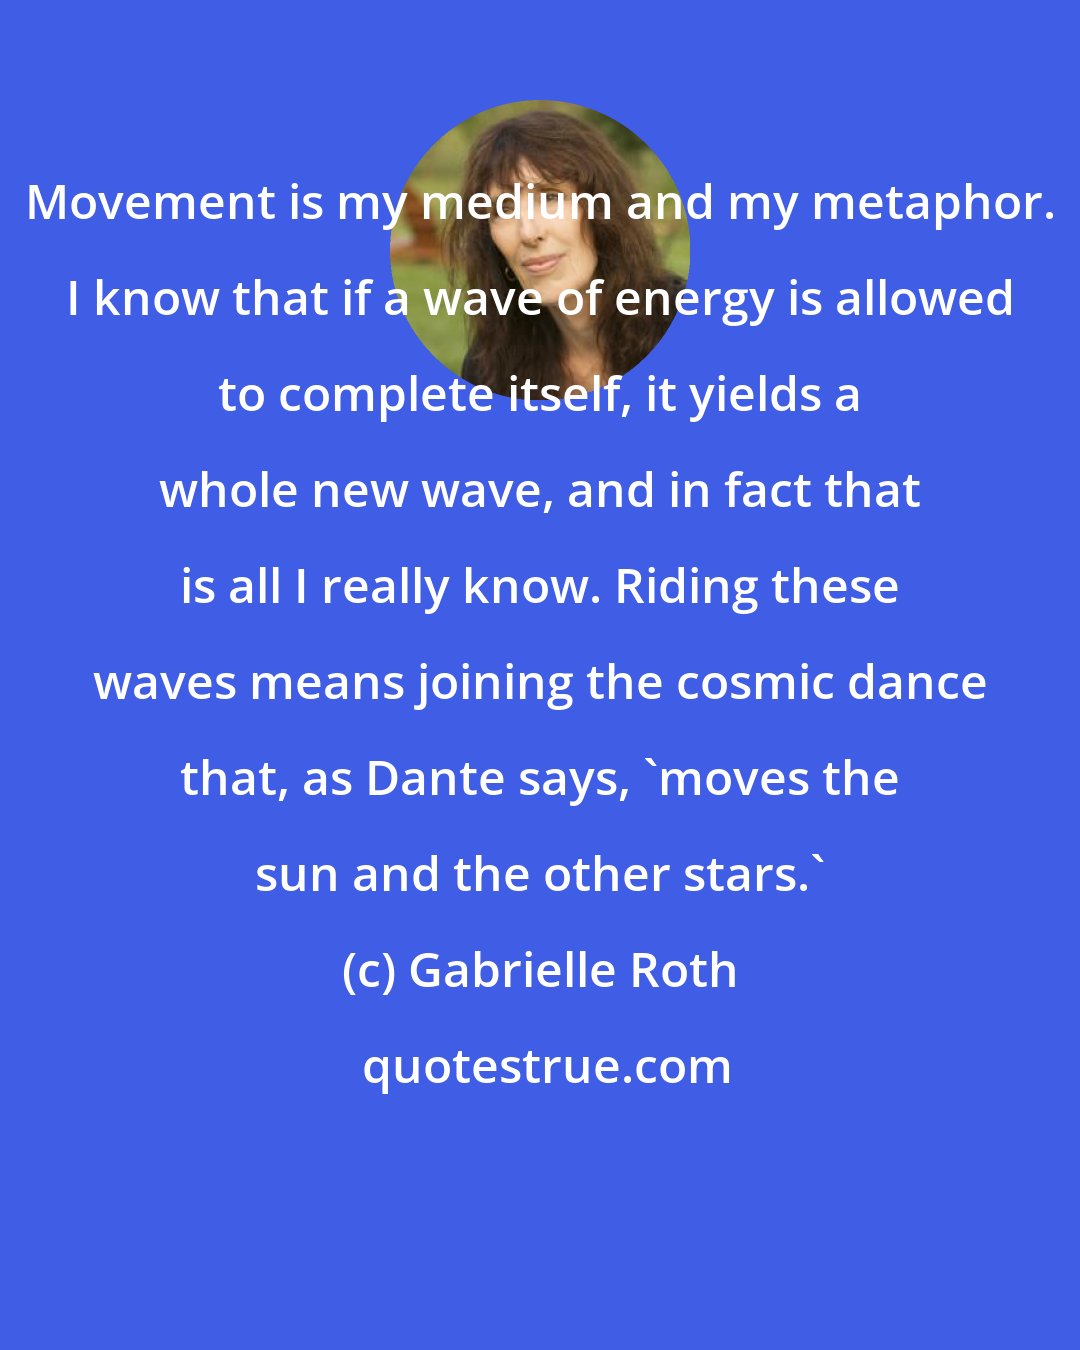 Gabrielle Roth: Movement is my medium and my metaphor. I know that if a wave of energy is allowed to complete itself, it yields a whole new wave, and in fact that is all I really know. Riding these waves means joining the cosmic dance that, as Dante says, 'moves the sun and the other stars.'